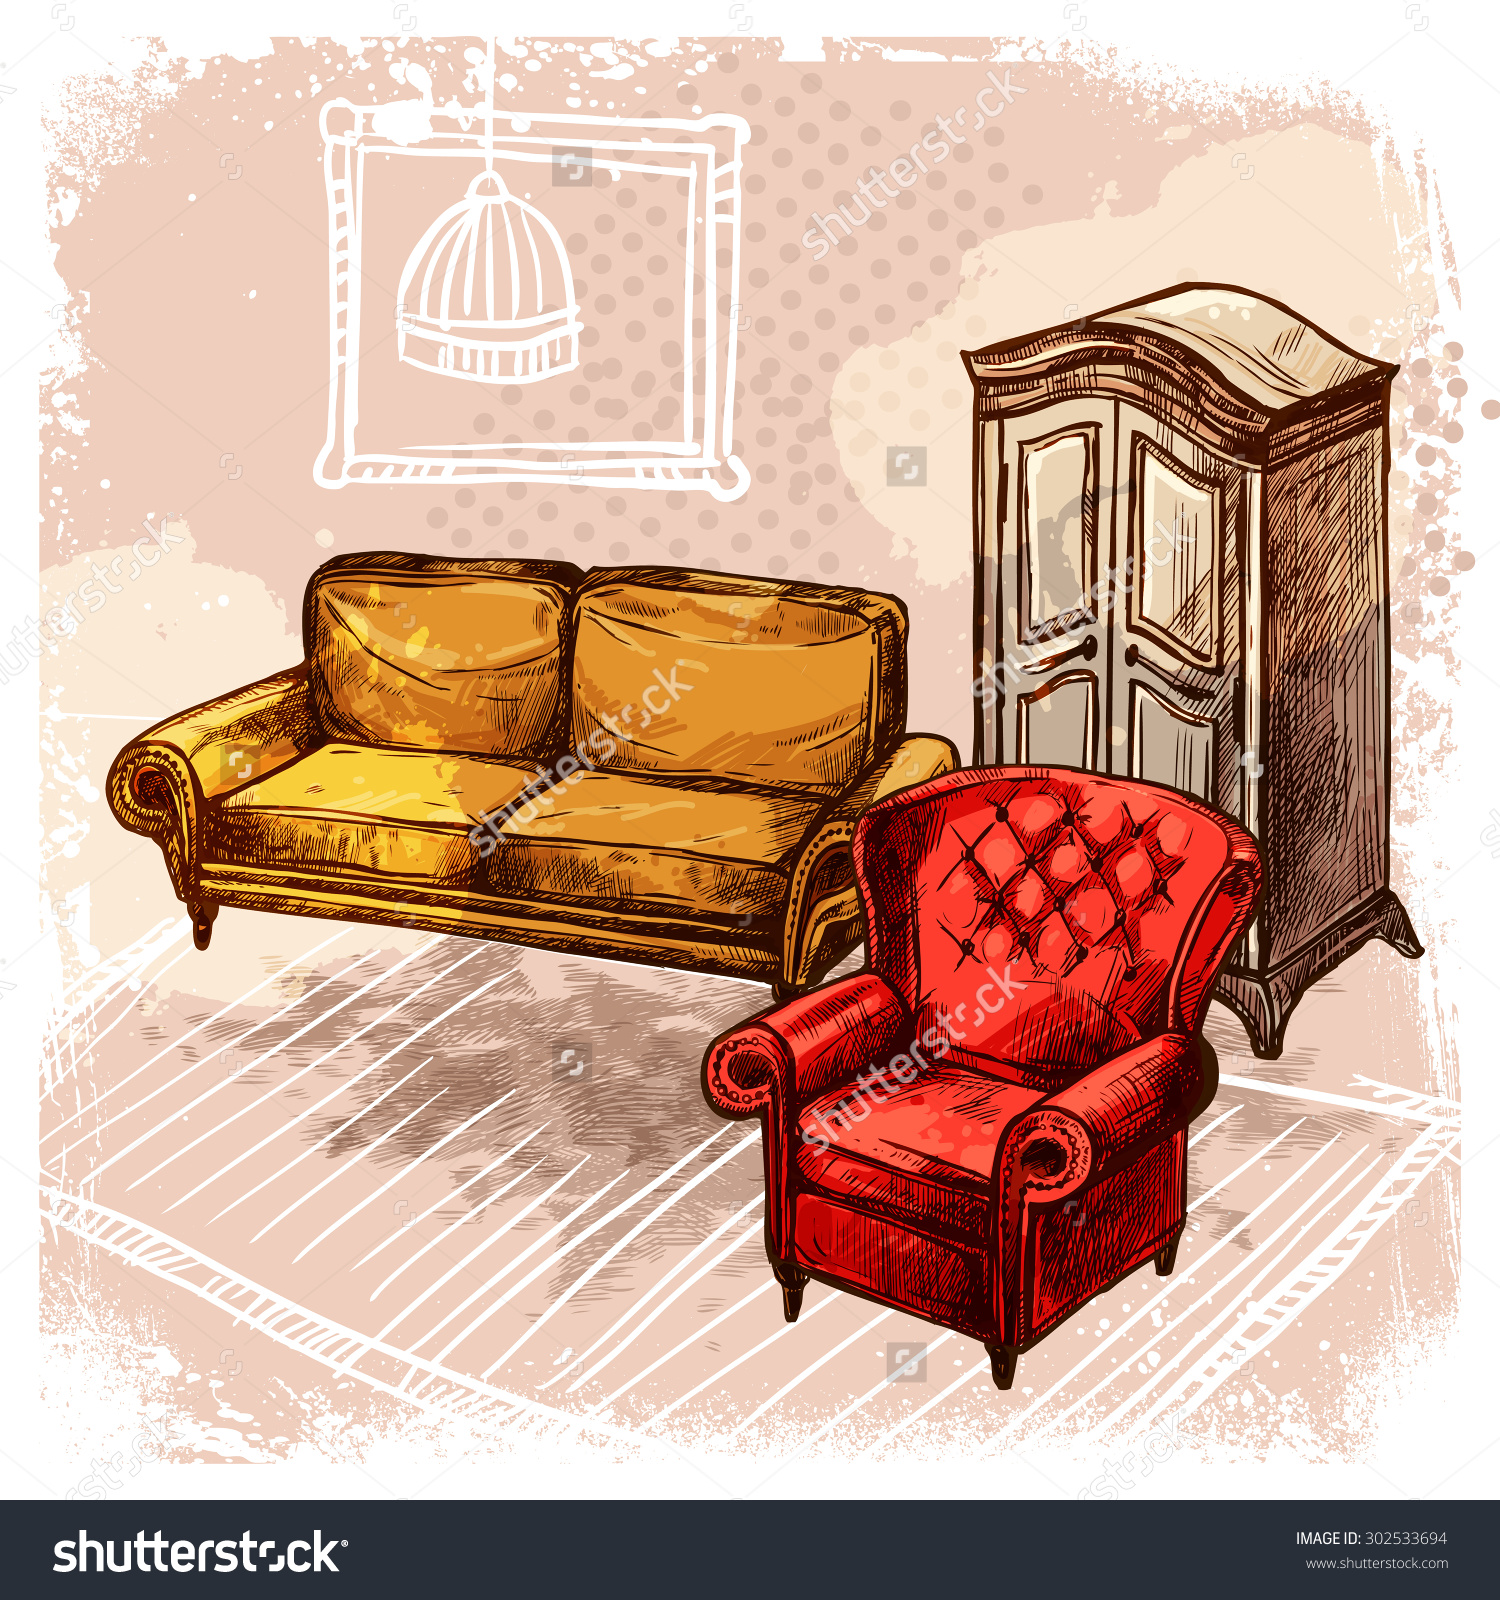 Retro Room Interior With Old Style Sketch Furniture Vector.